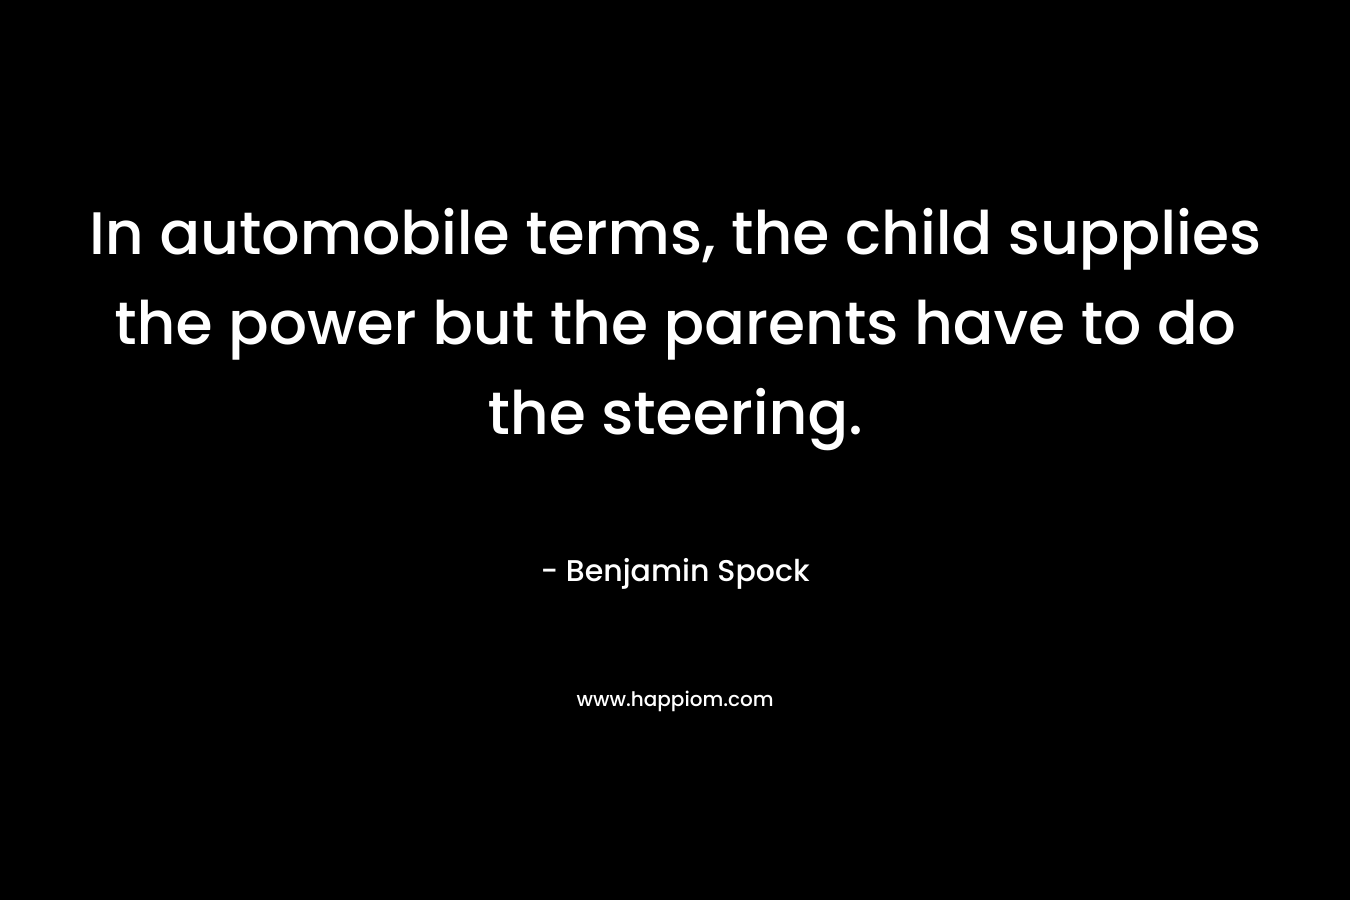 In automobile terms, the child supplies the power but the parents have to do the steering.